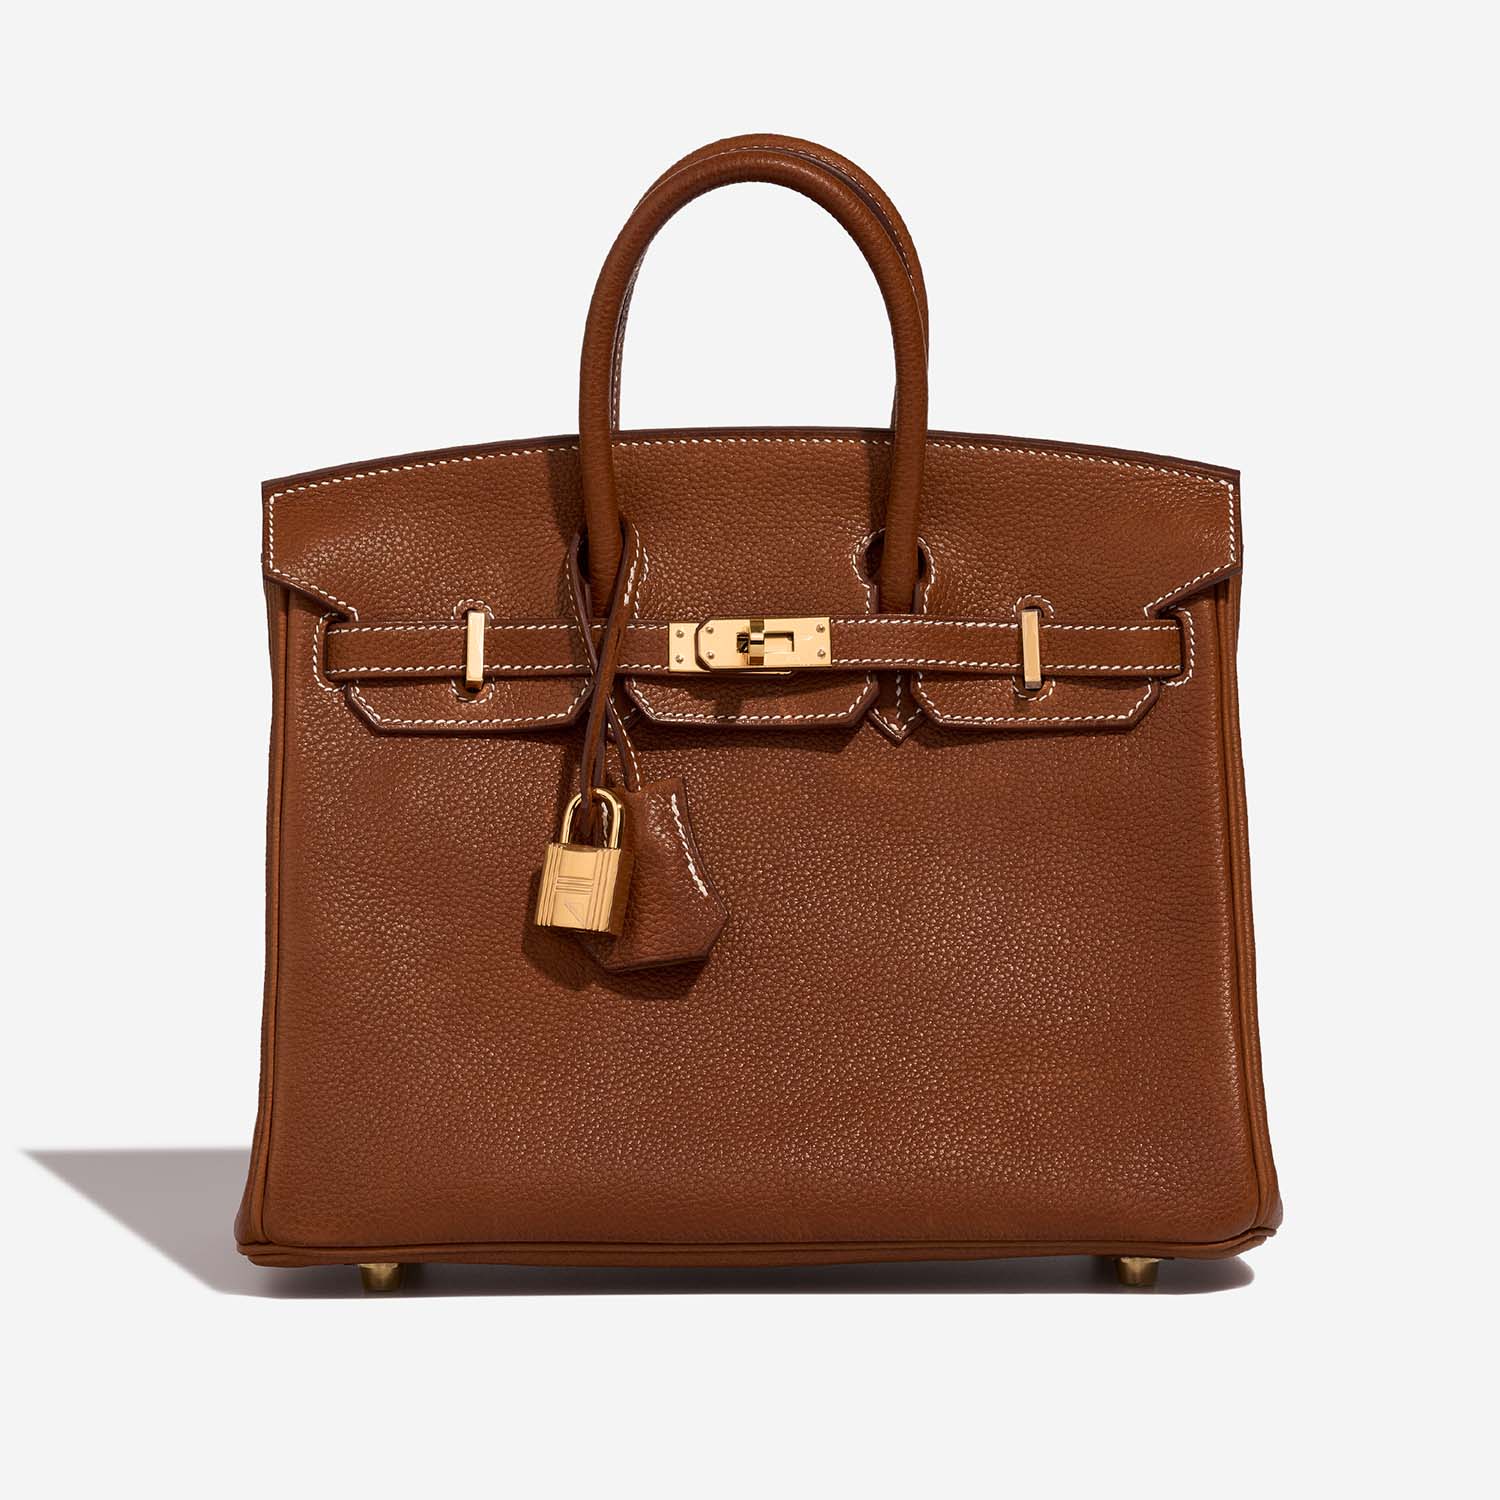 Fun facts about our new Barenia leather Birkin 25 🚨collector bag